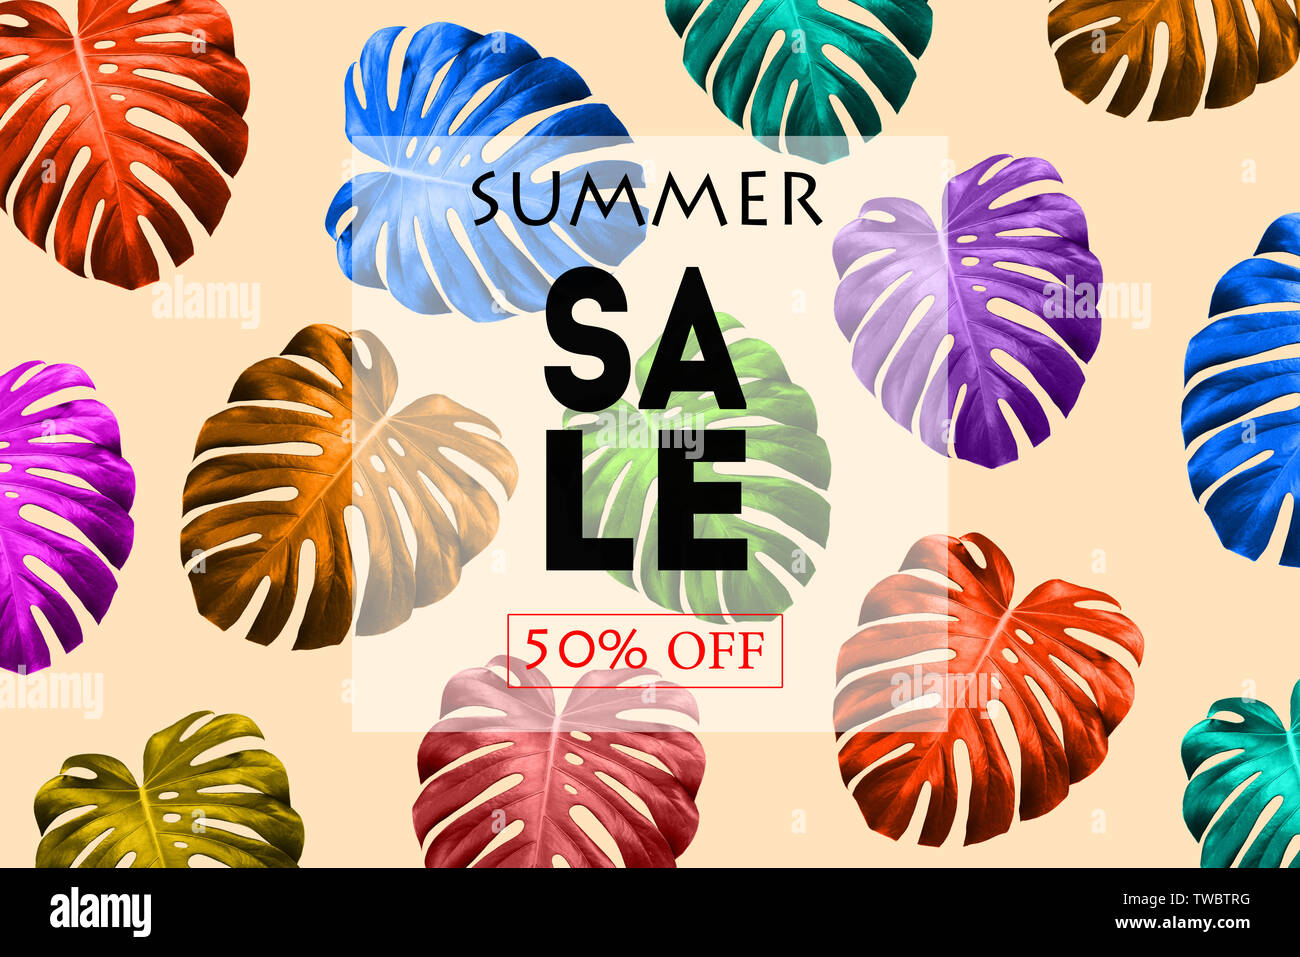 Bright summer sale banner with tropical colorful leaves. Exotic colorful design for flyer, banner, poster, invitation, website or greeting card. Fashi Stock Photo